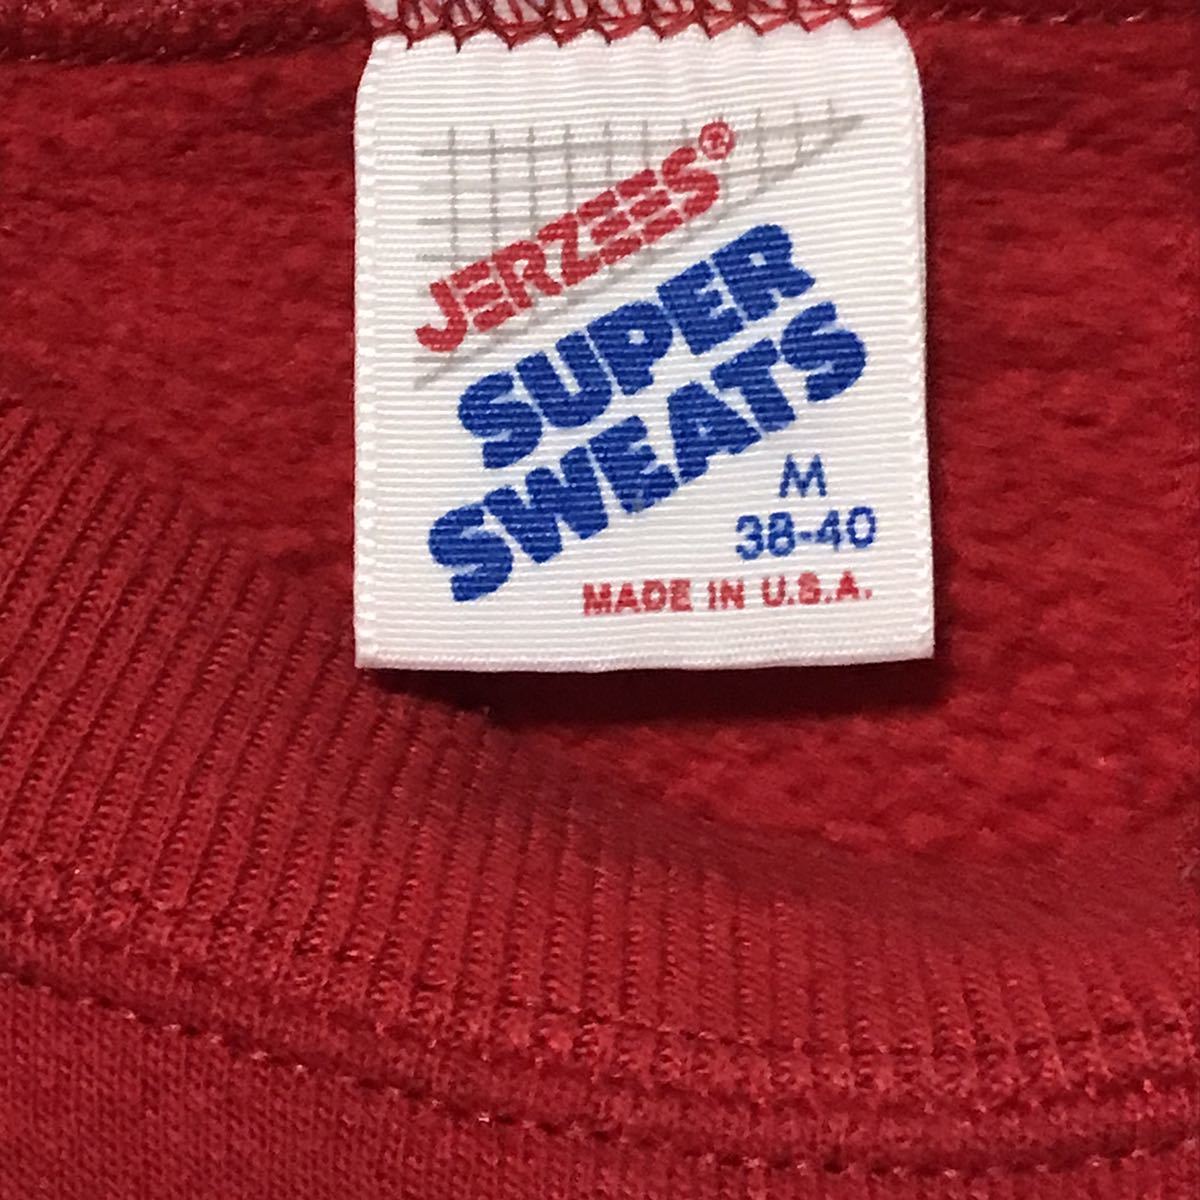 80s～90s USED SWEAT SHIRTS MADE IN USA 80's～90's 中古 カレッジ スウェット シャツ MEDIUM アメリカ製 送料無料_画像4